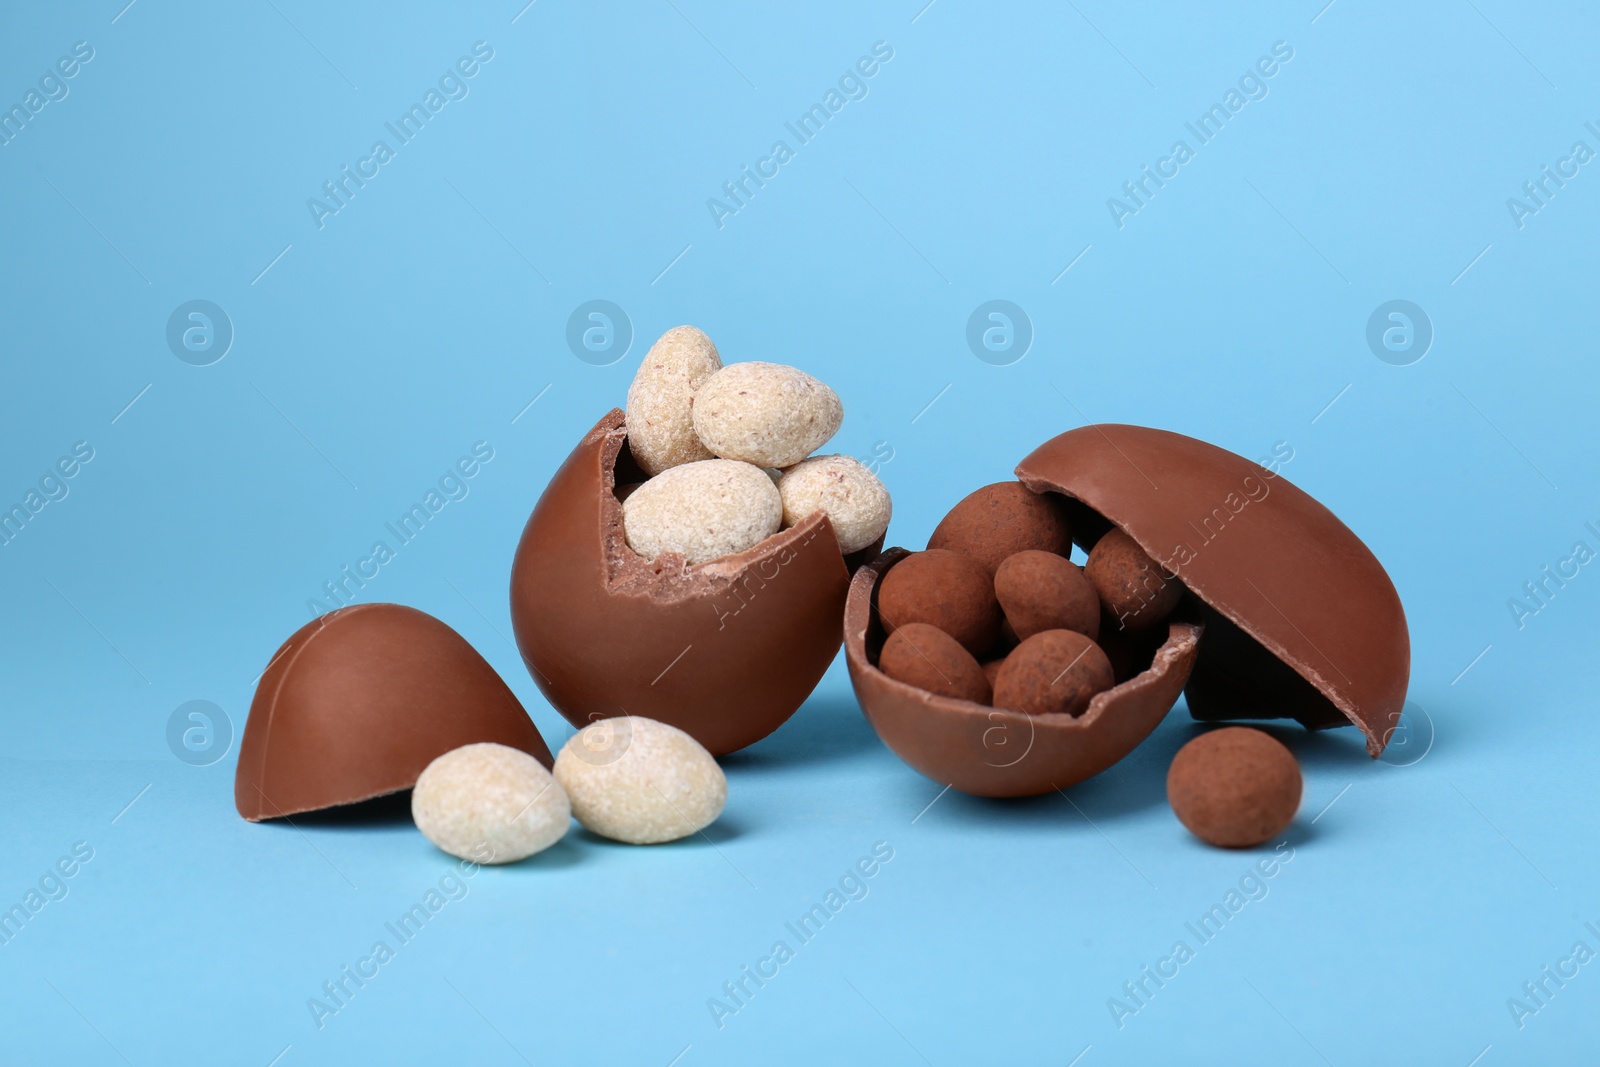 Photo of Tasty broken chocolate eggs and sweets on light blue background